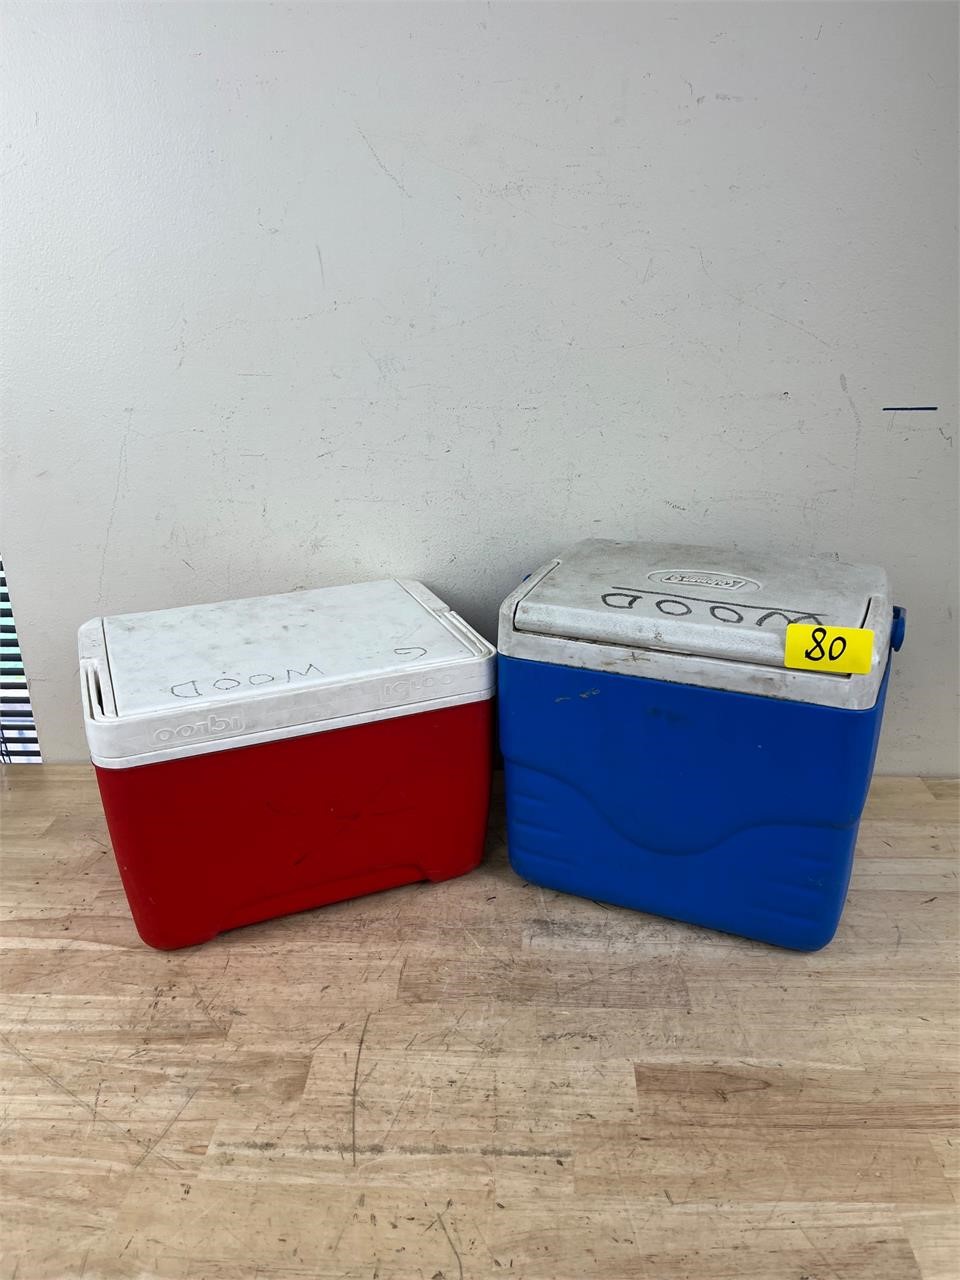 Two Personal Coolers